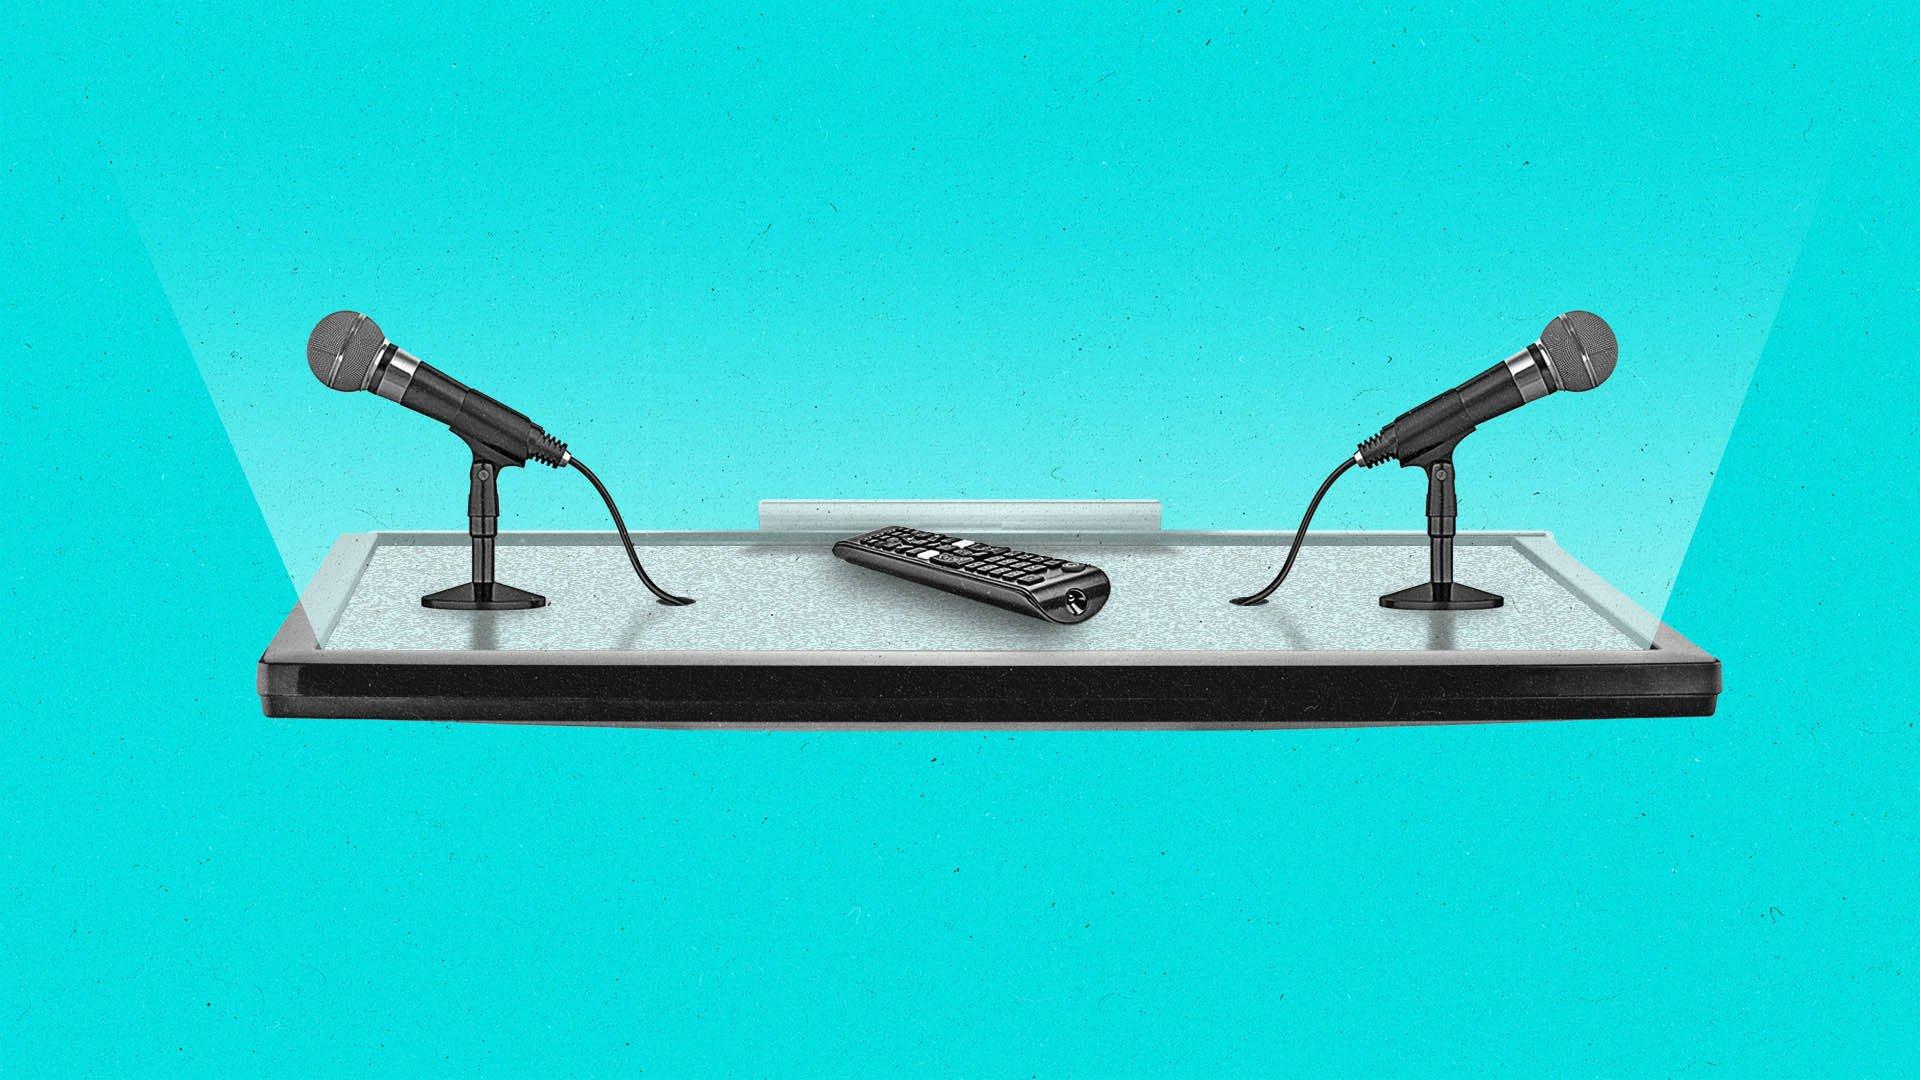 A streaming remote and two microphones sit on top of a connected TV as if it were a table.